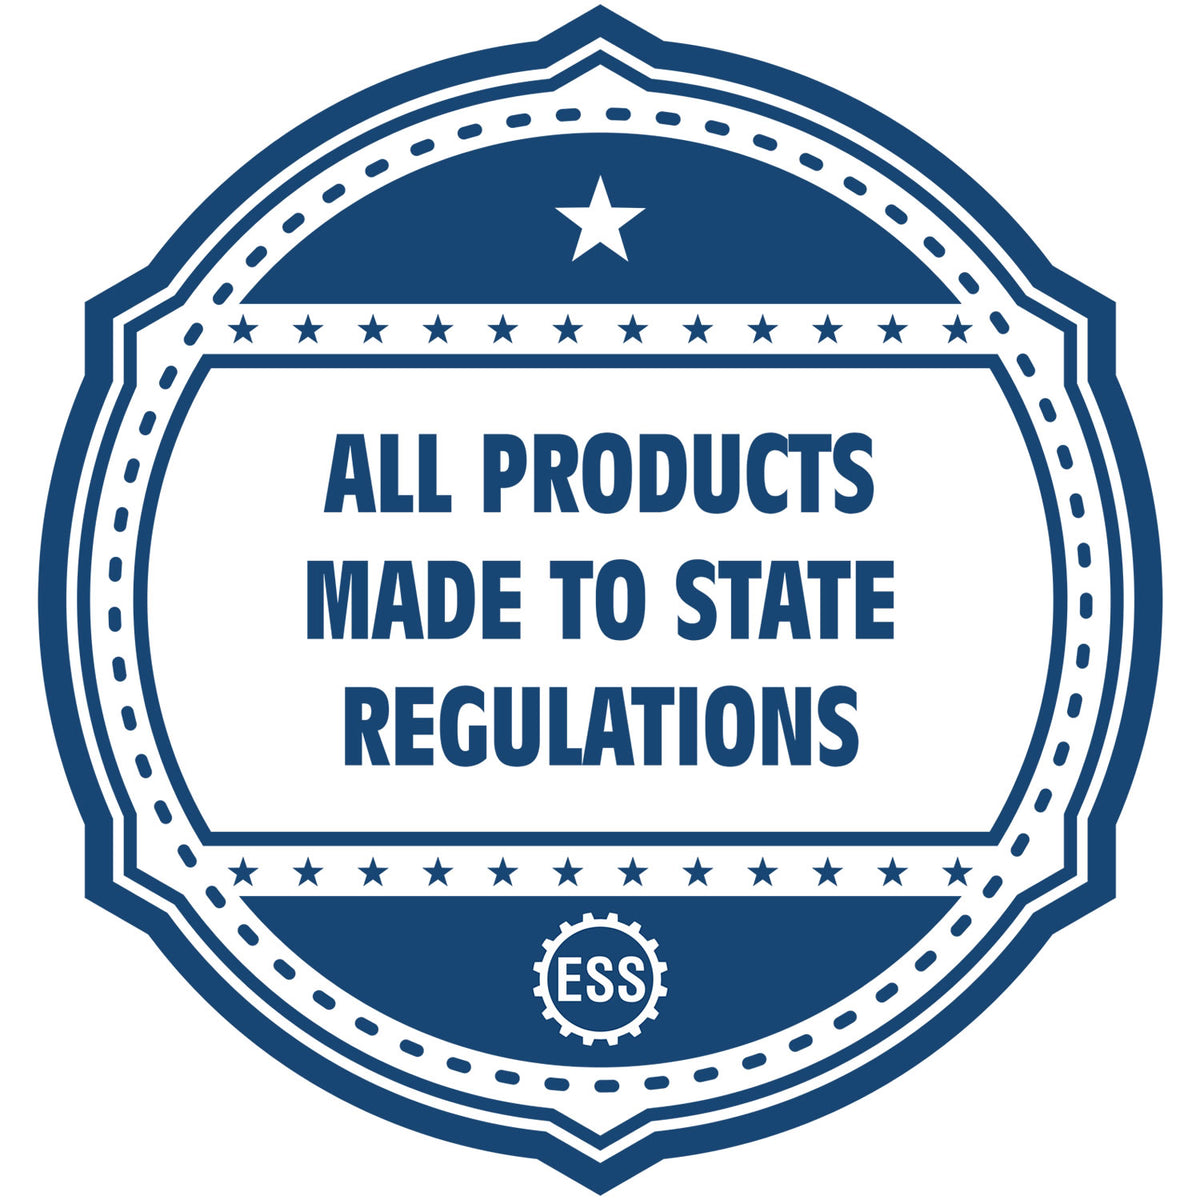 A blue icon or badge for the Hybrid California Engineer Seal showing that this product is made in compliance with state regulations.